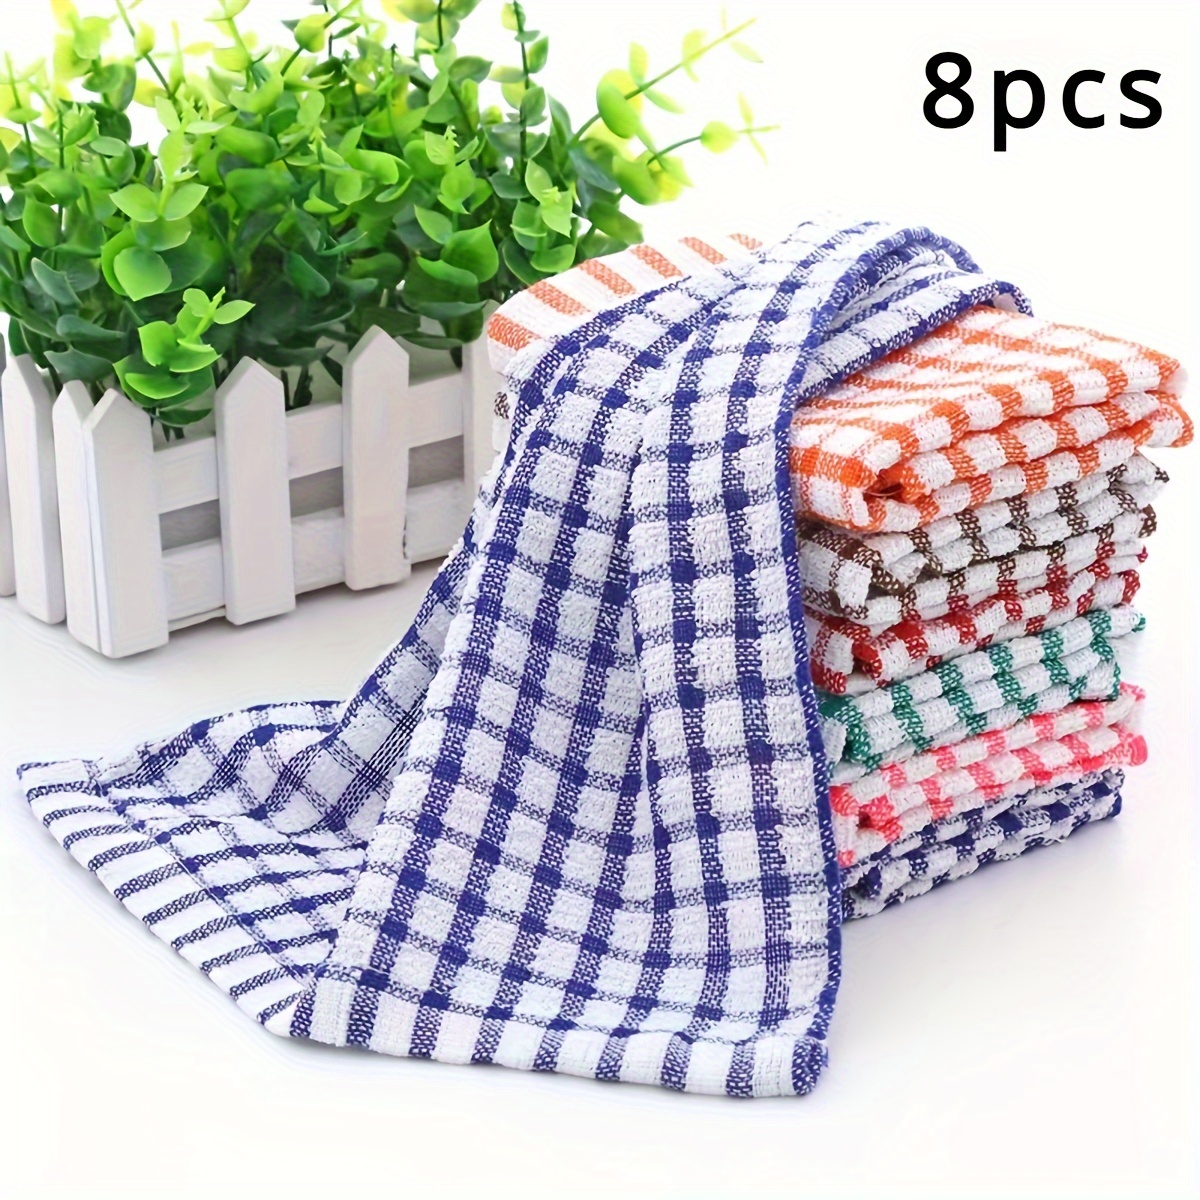 

8-piece Modern Cotton Kitchen Towels - Lightweight, Absorbent Dish Cloths With Jacquard Plaid Design, 16x11 Inches, Hand Wash Only